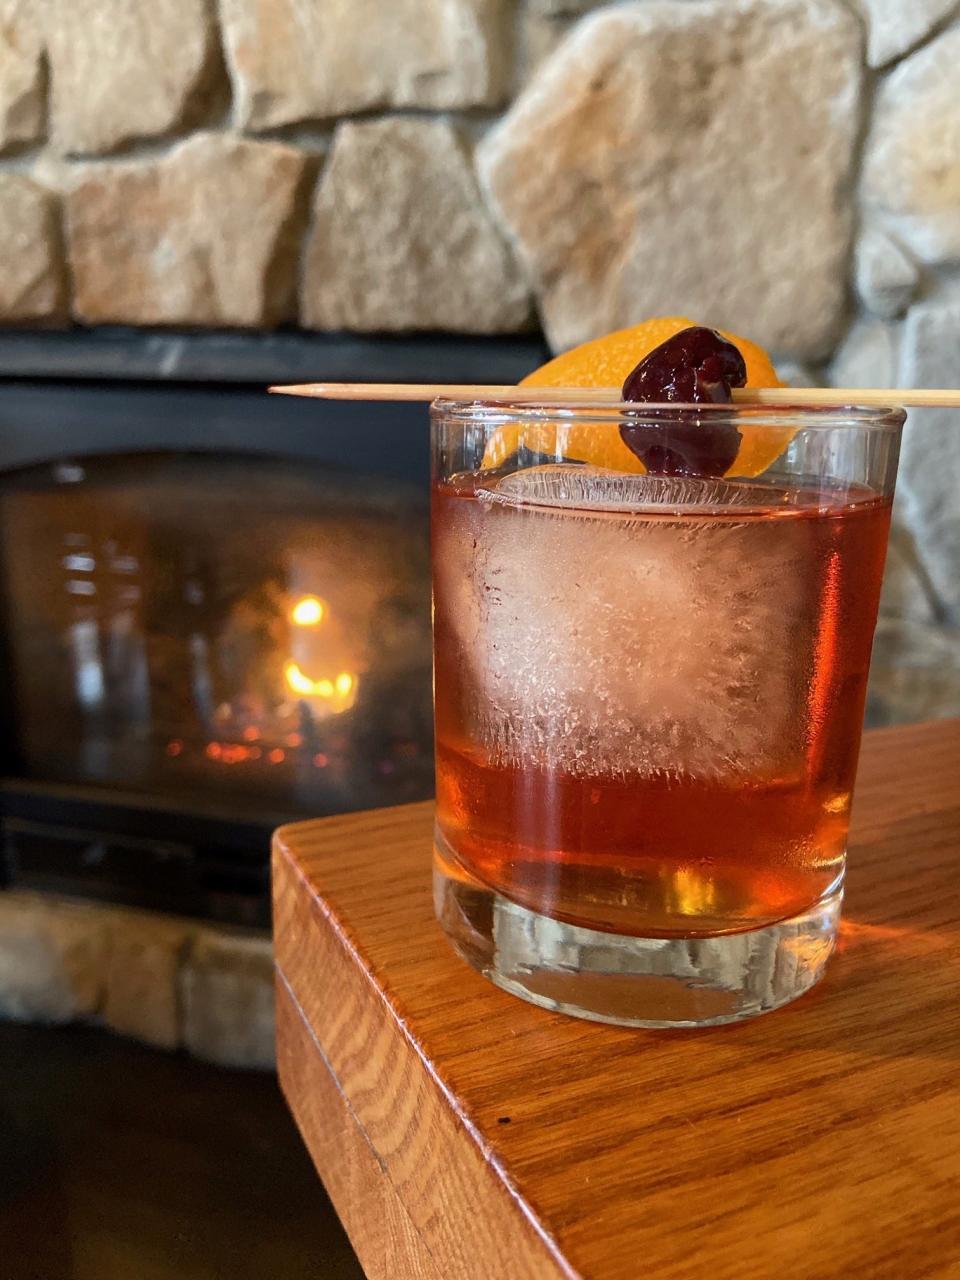 Cocktails and fireplaces go hand in hand in the winter months and you can get both at Keg & Kitchen in Westmont.